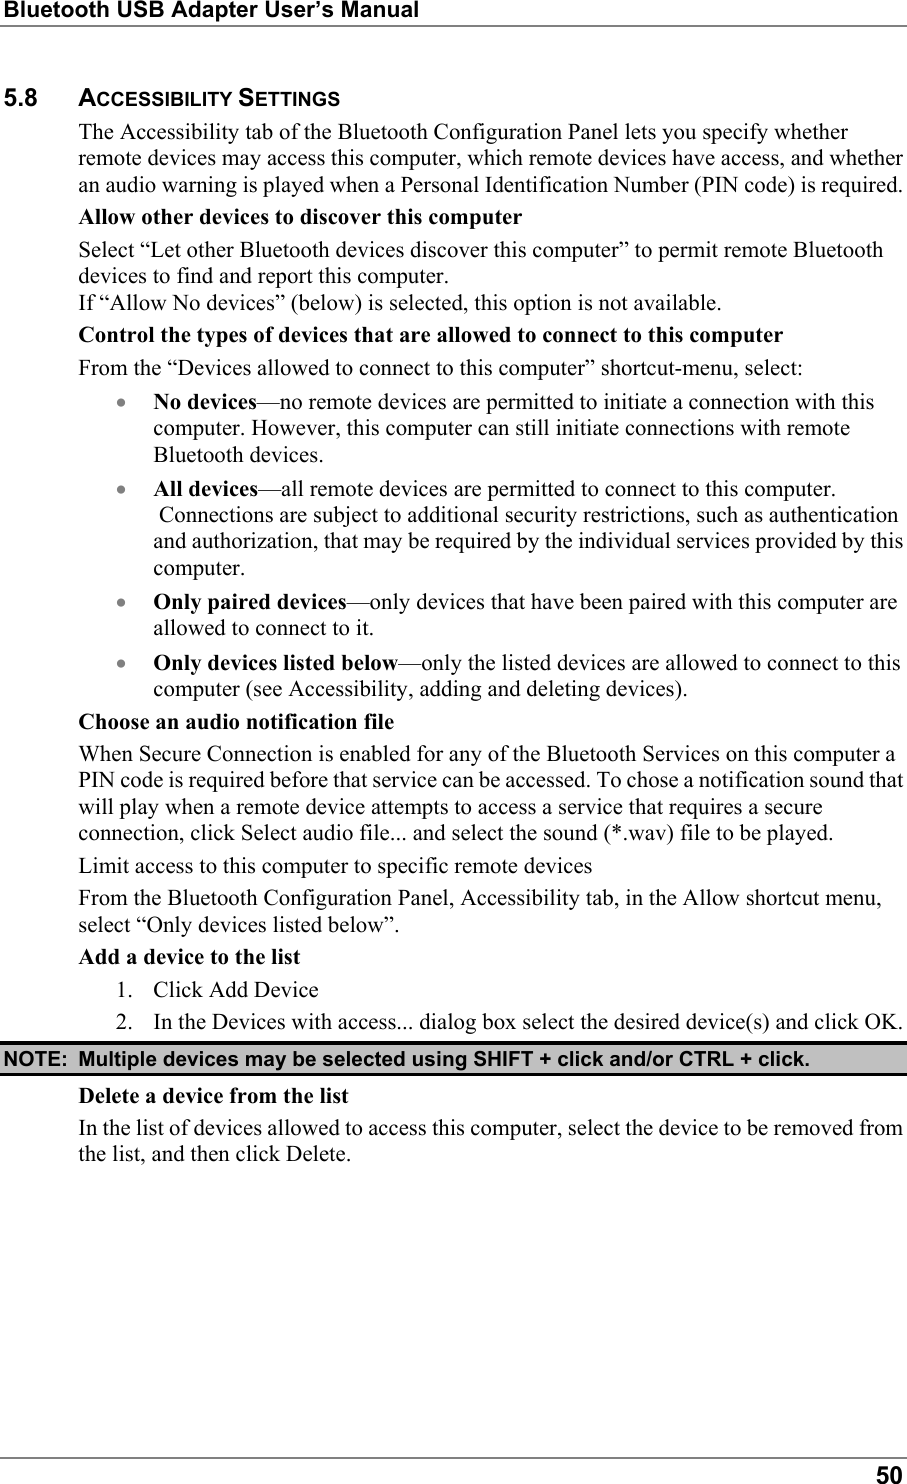 Bluetooth USB Adapter User’s Manual505.8 ACCESSIBILITY SETTINGSThe Accessibility tab of the Bluetooth Configuration Panel lets you specify whetherremote devices may access this computer, which remote devices have access, and whetheran audio warning is played when a Personal Identification Number (PIN code) is required.Allow other devices to discover this computerSelect “Let other Bluetooth devices discover this computer” to permit remote Bluetoothdevices to find and report this computer.If “Allow No devices” (below) is selected, this option is not available.Control the types of devices that are allowed to connect to this computerFrom the “Devices allowed to connect to this computer” shortcut-menu, select:• No devices—no remote devices are permitted to initiate a connection with thiscomputer. However, this computer can still initiate connections with remoteBluetooth devices.• All devices—all remote devices are permitted to connect to this computer. Connections are subject to additional security restrictions, such as authenticationand authorization, that may be required by the individual services provided by thiscomputer.• Only paired devices—only devices that have been paired with this computer areallowed to connect to it.• Only devices listed below—only the listed devices are allowed to connect to thiscomputer (see Accessibility, adding and deleting devices).Choose an audio notification fileWhen Secure Connection is enabled for any of the Bluetooth Services on this computer aPIN code is required before that service can be accessed. To chose a notification sound thatwill play when a remote device attempts to access a service that requires a secureconnection, click Select audio file... and select the sound (*.wav) file to be played.Limit access to this computer to specific remote devicesFrom the Bluetooth Configuration Panel, Accessibility tab, in the Allow shortcut menu,select “Only devices listed below”.Add a device to the list1. Click Add Device2. In the Devices with access... dialog box select the desired device(s) and click OK.NOTE: Multiple devices may be selected using SHIFT + click and/or CTRL + click.Delete a device from the listIn the list of devices allowed to access this computer, select the device to be removed fromthe list, and then click Delete.